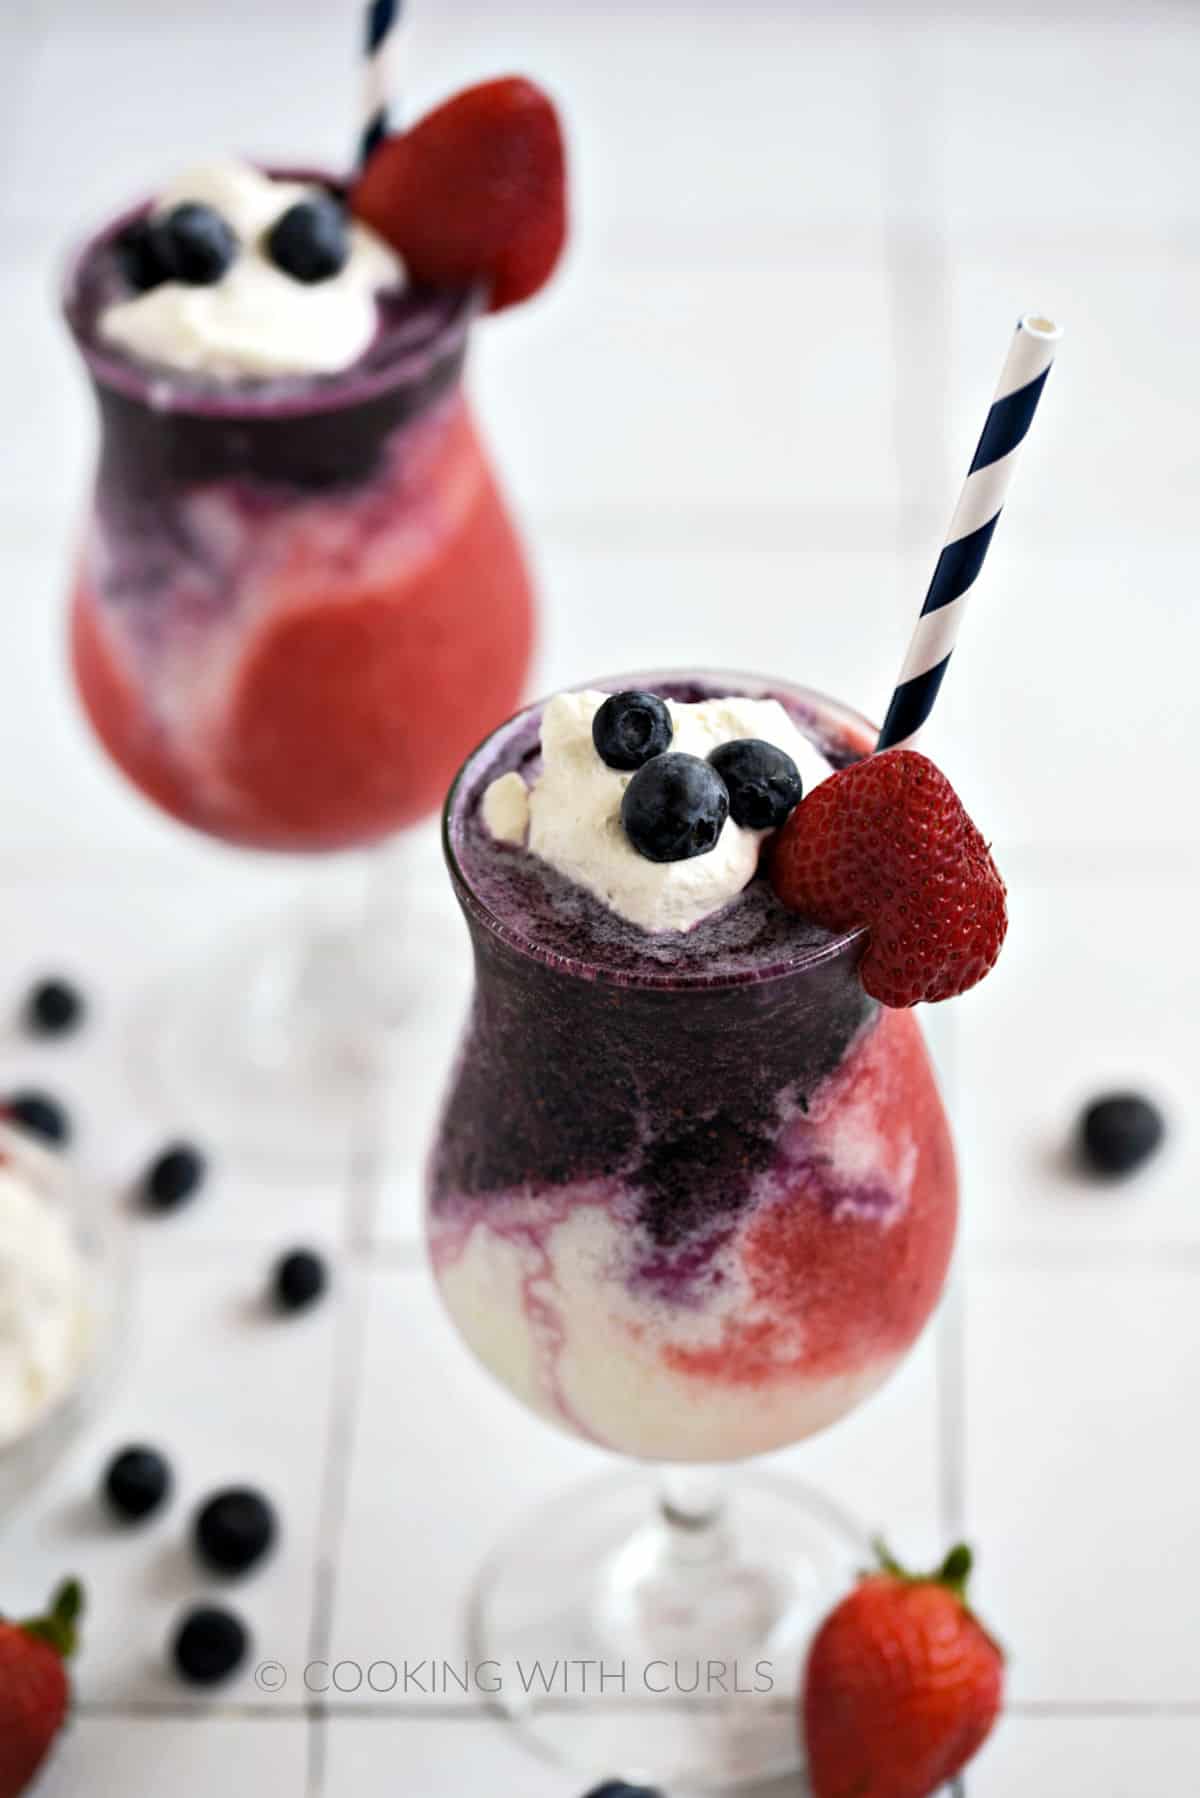 Blueberry, white, and strawberry layers topped with whipped cream, fresh blueberries and a strawberry in two hurricane glasses with a blue and white striped straw and scattered berries around the base.